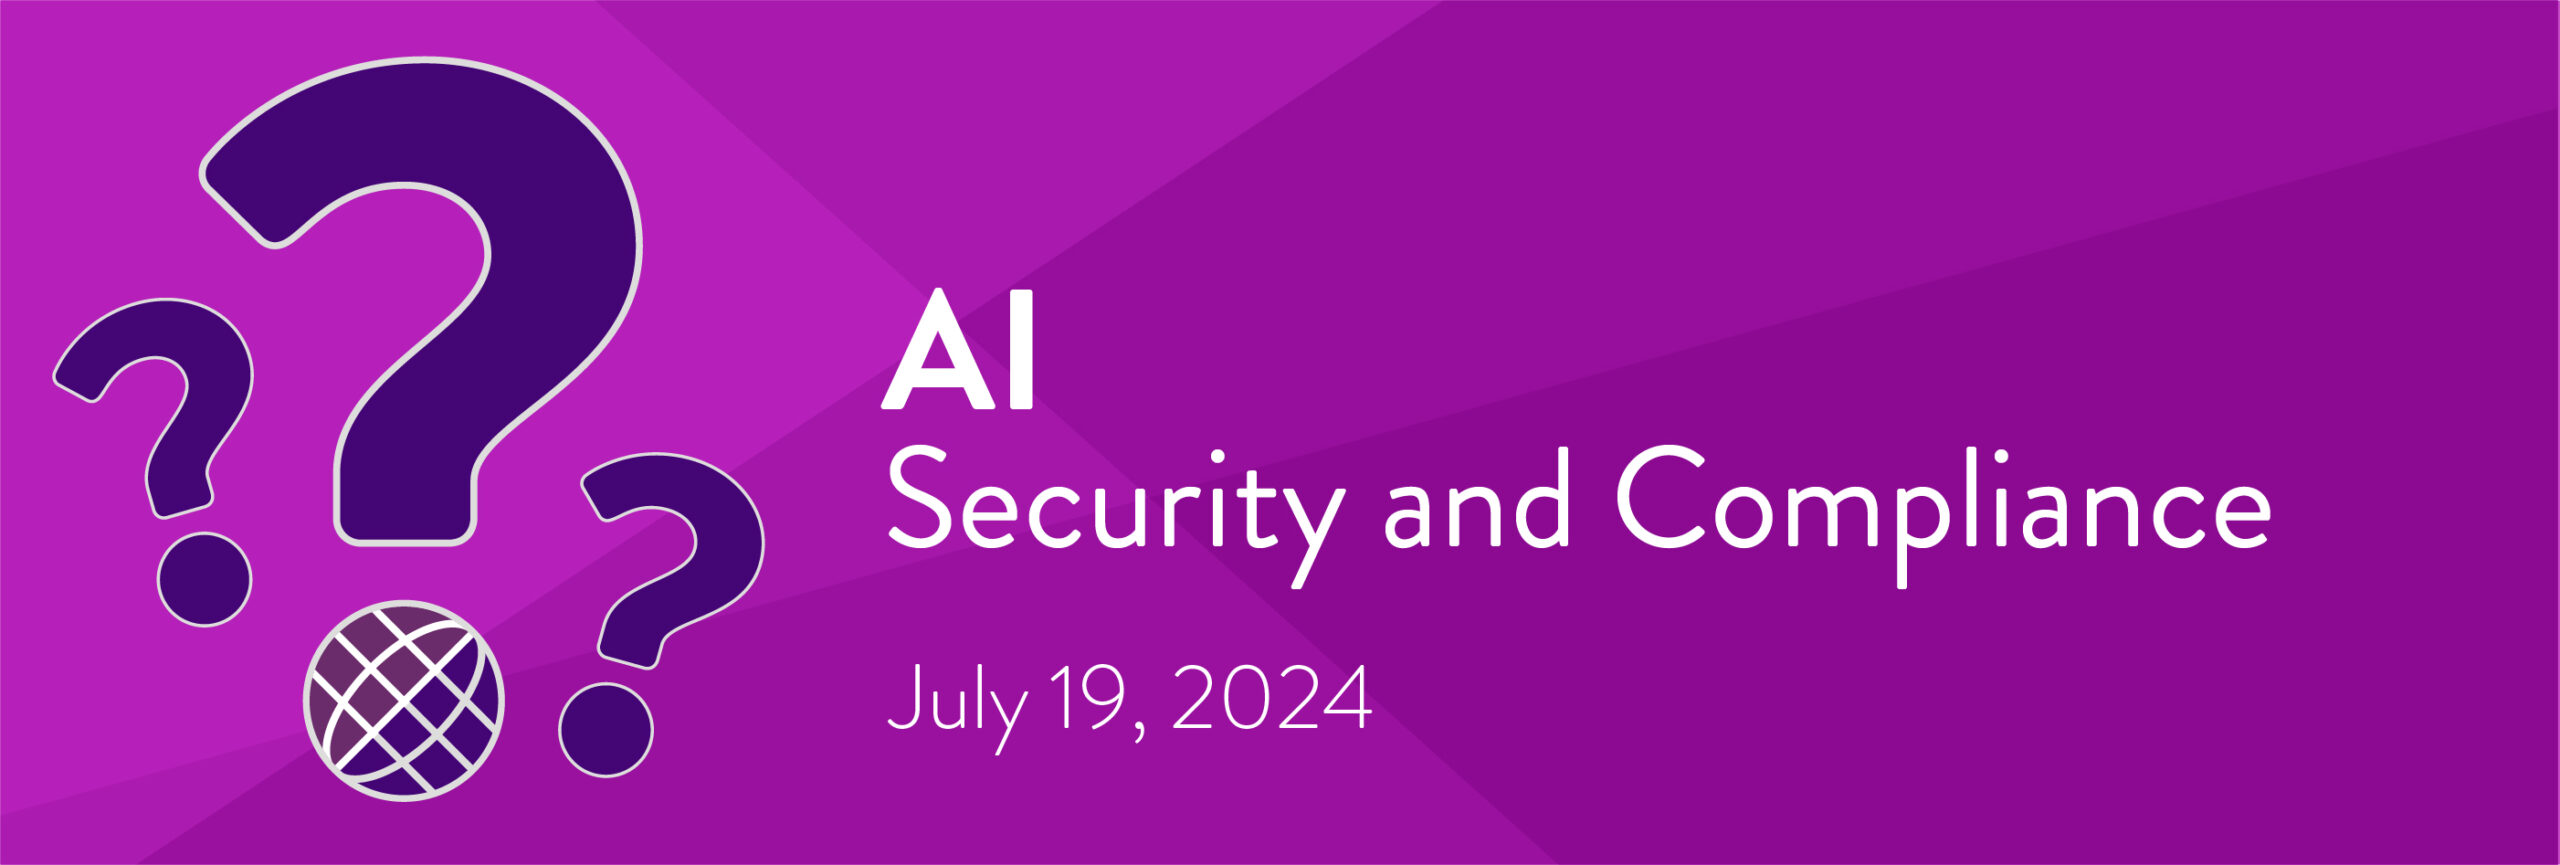 AI - Security and Compliance